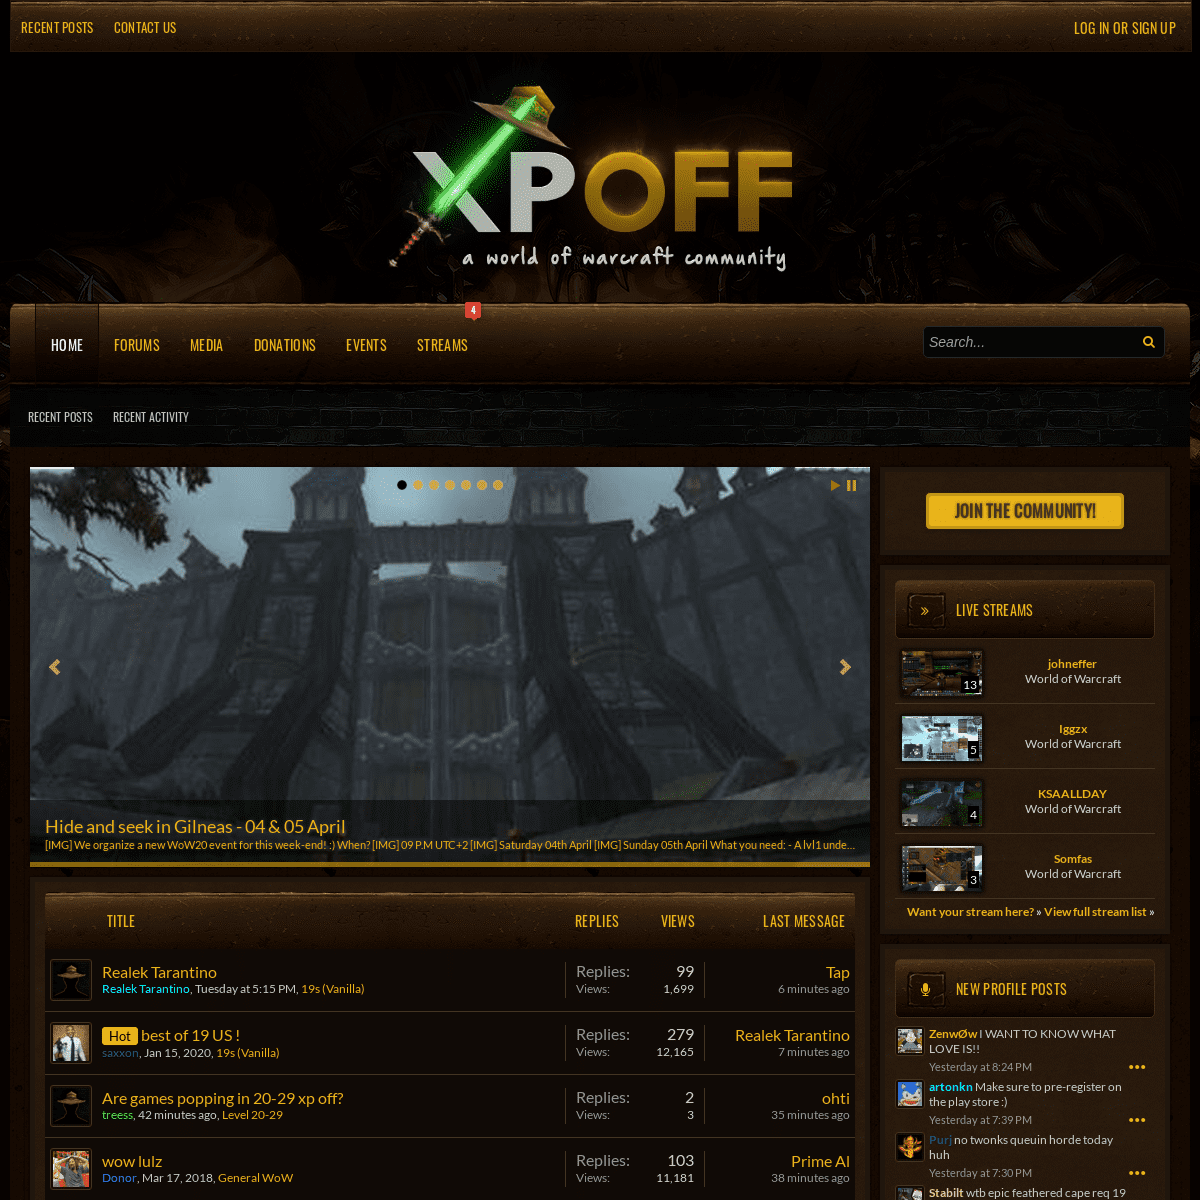 A complete backup of xpoff.com